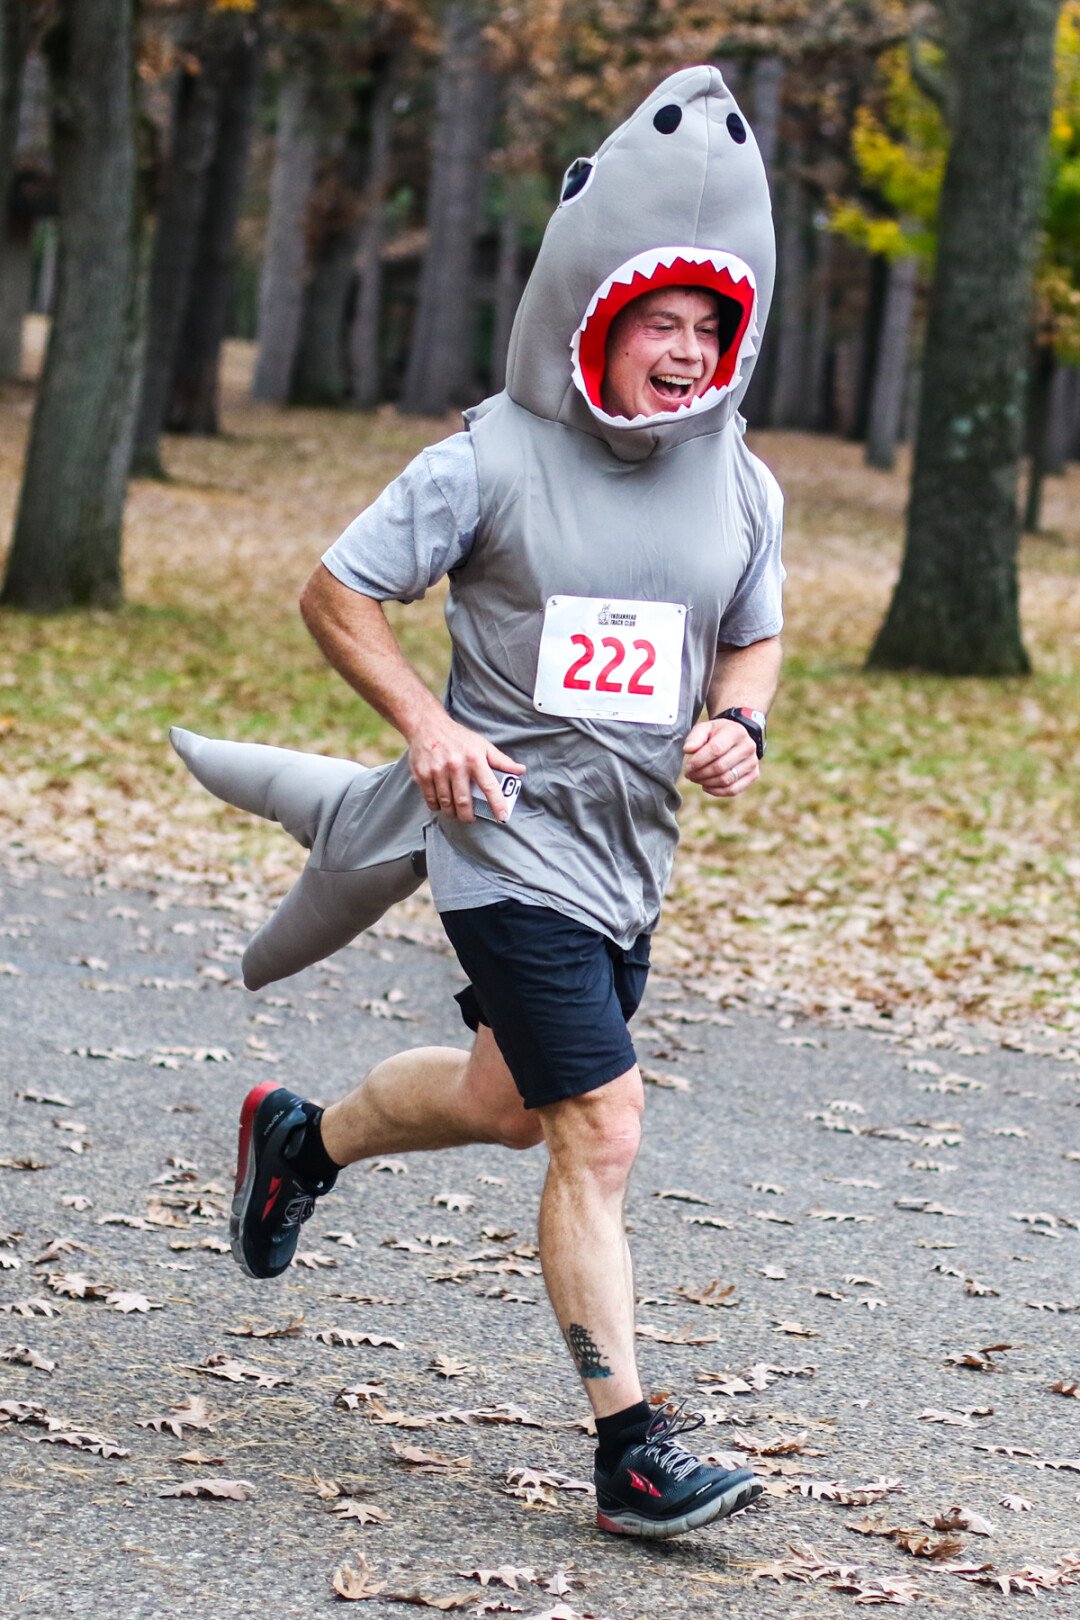 BET HE’S EVEN FASTER IN THE WATER. The Carson Park Five and Ten + Kid’s BOO-gie Run took place on Saturday, Oct. 29, in Eau Claire where kids and adults ran in costume. 